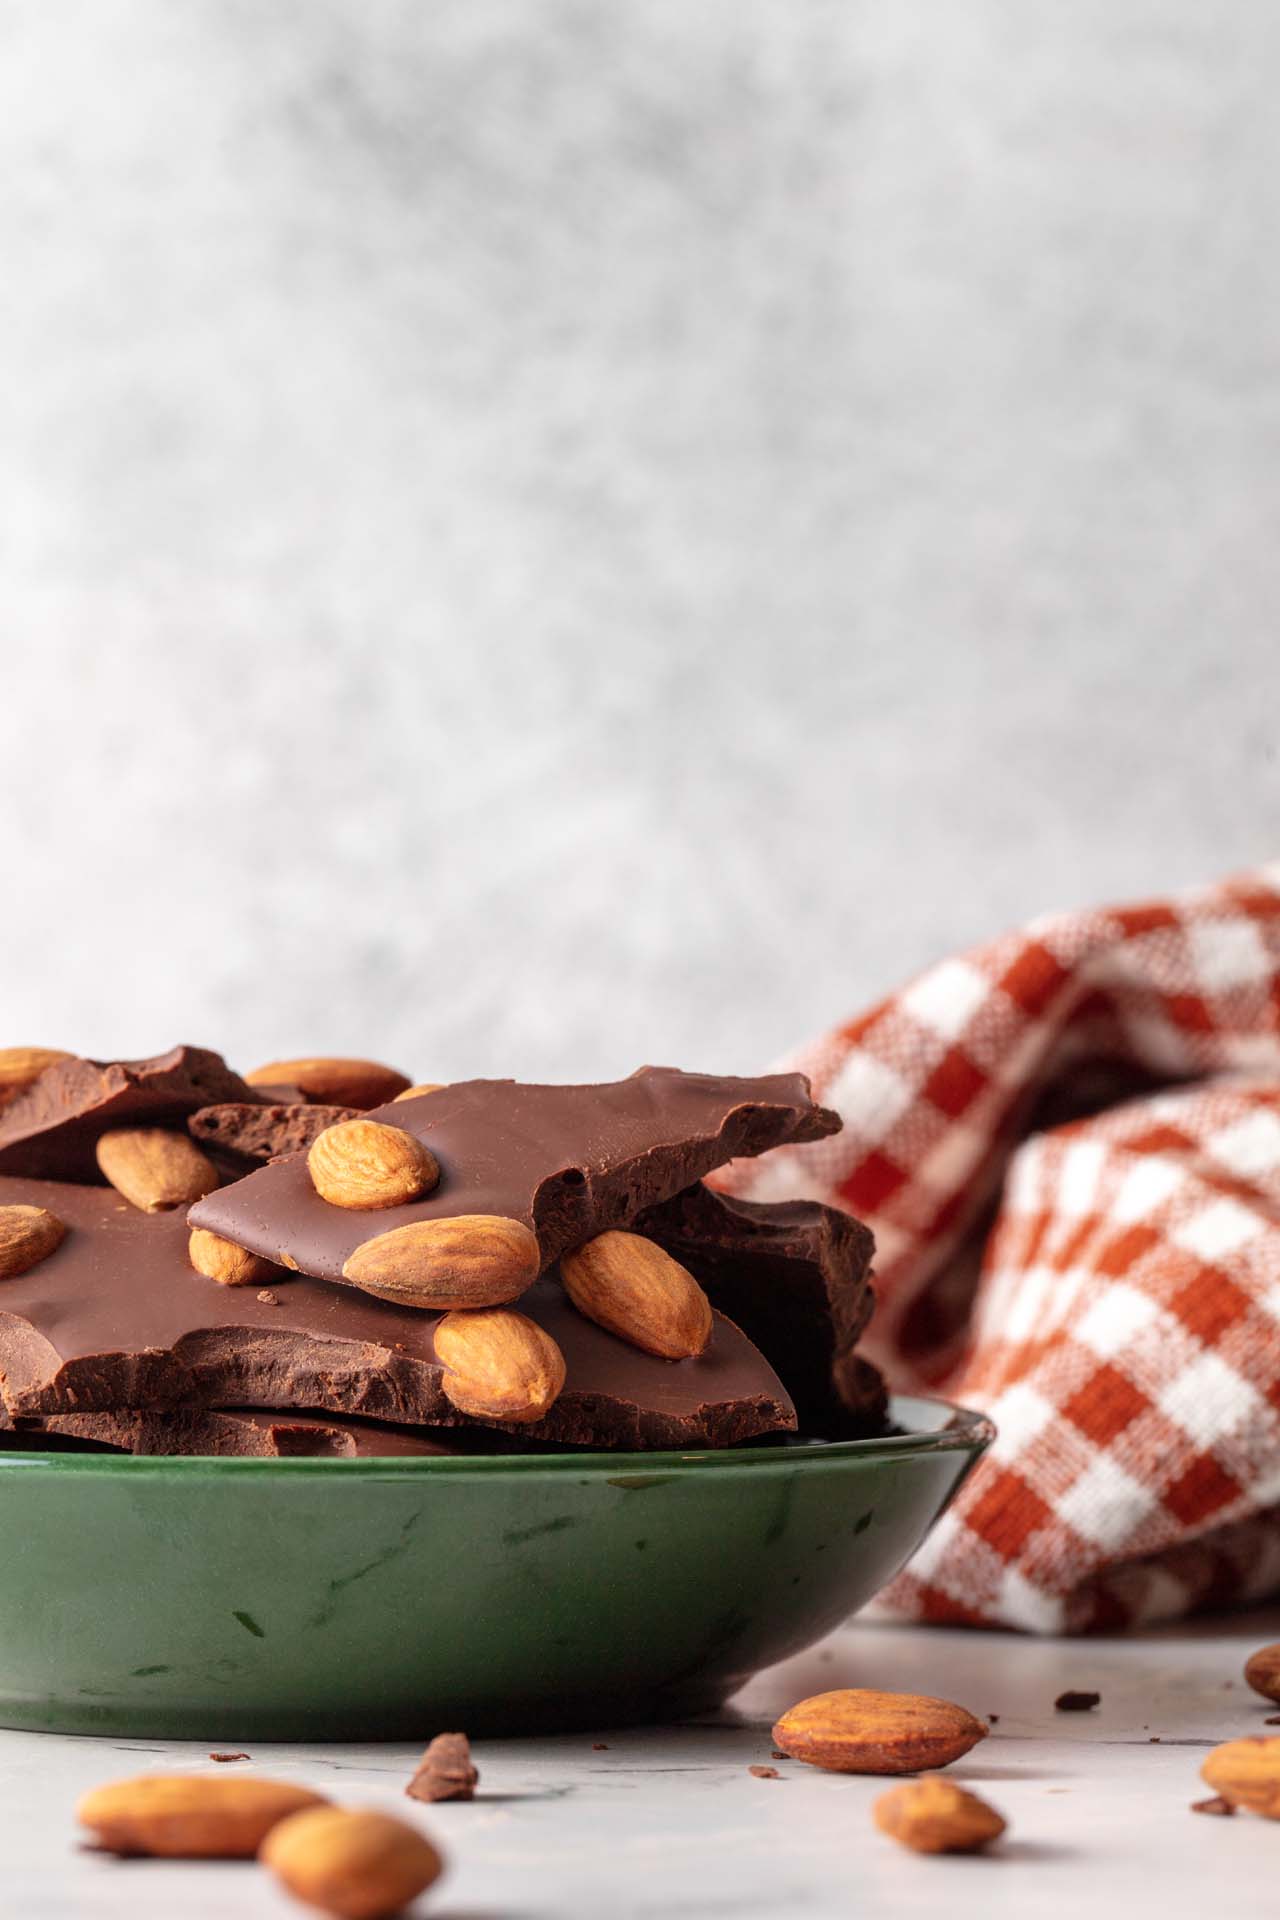 Bowl of Chocolate Bark Made with Natural Whole Almonds -Baked Goods and Confections